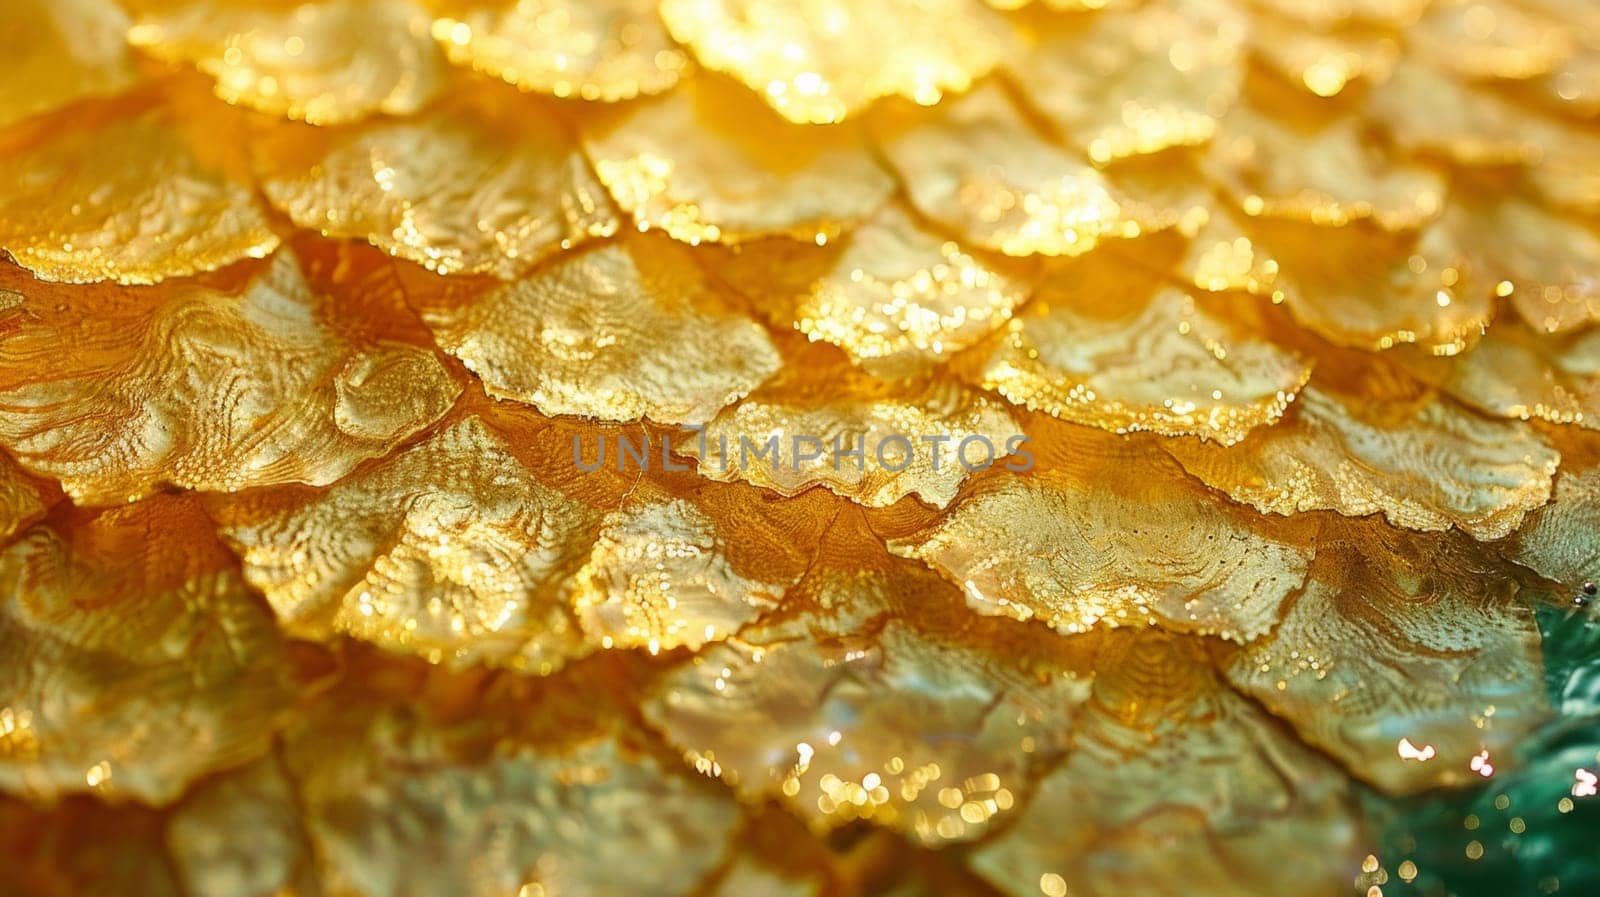 A close up of a gold leafed fish scale pattern on the surface